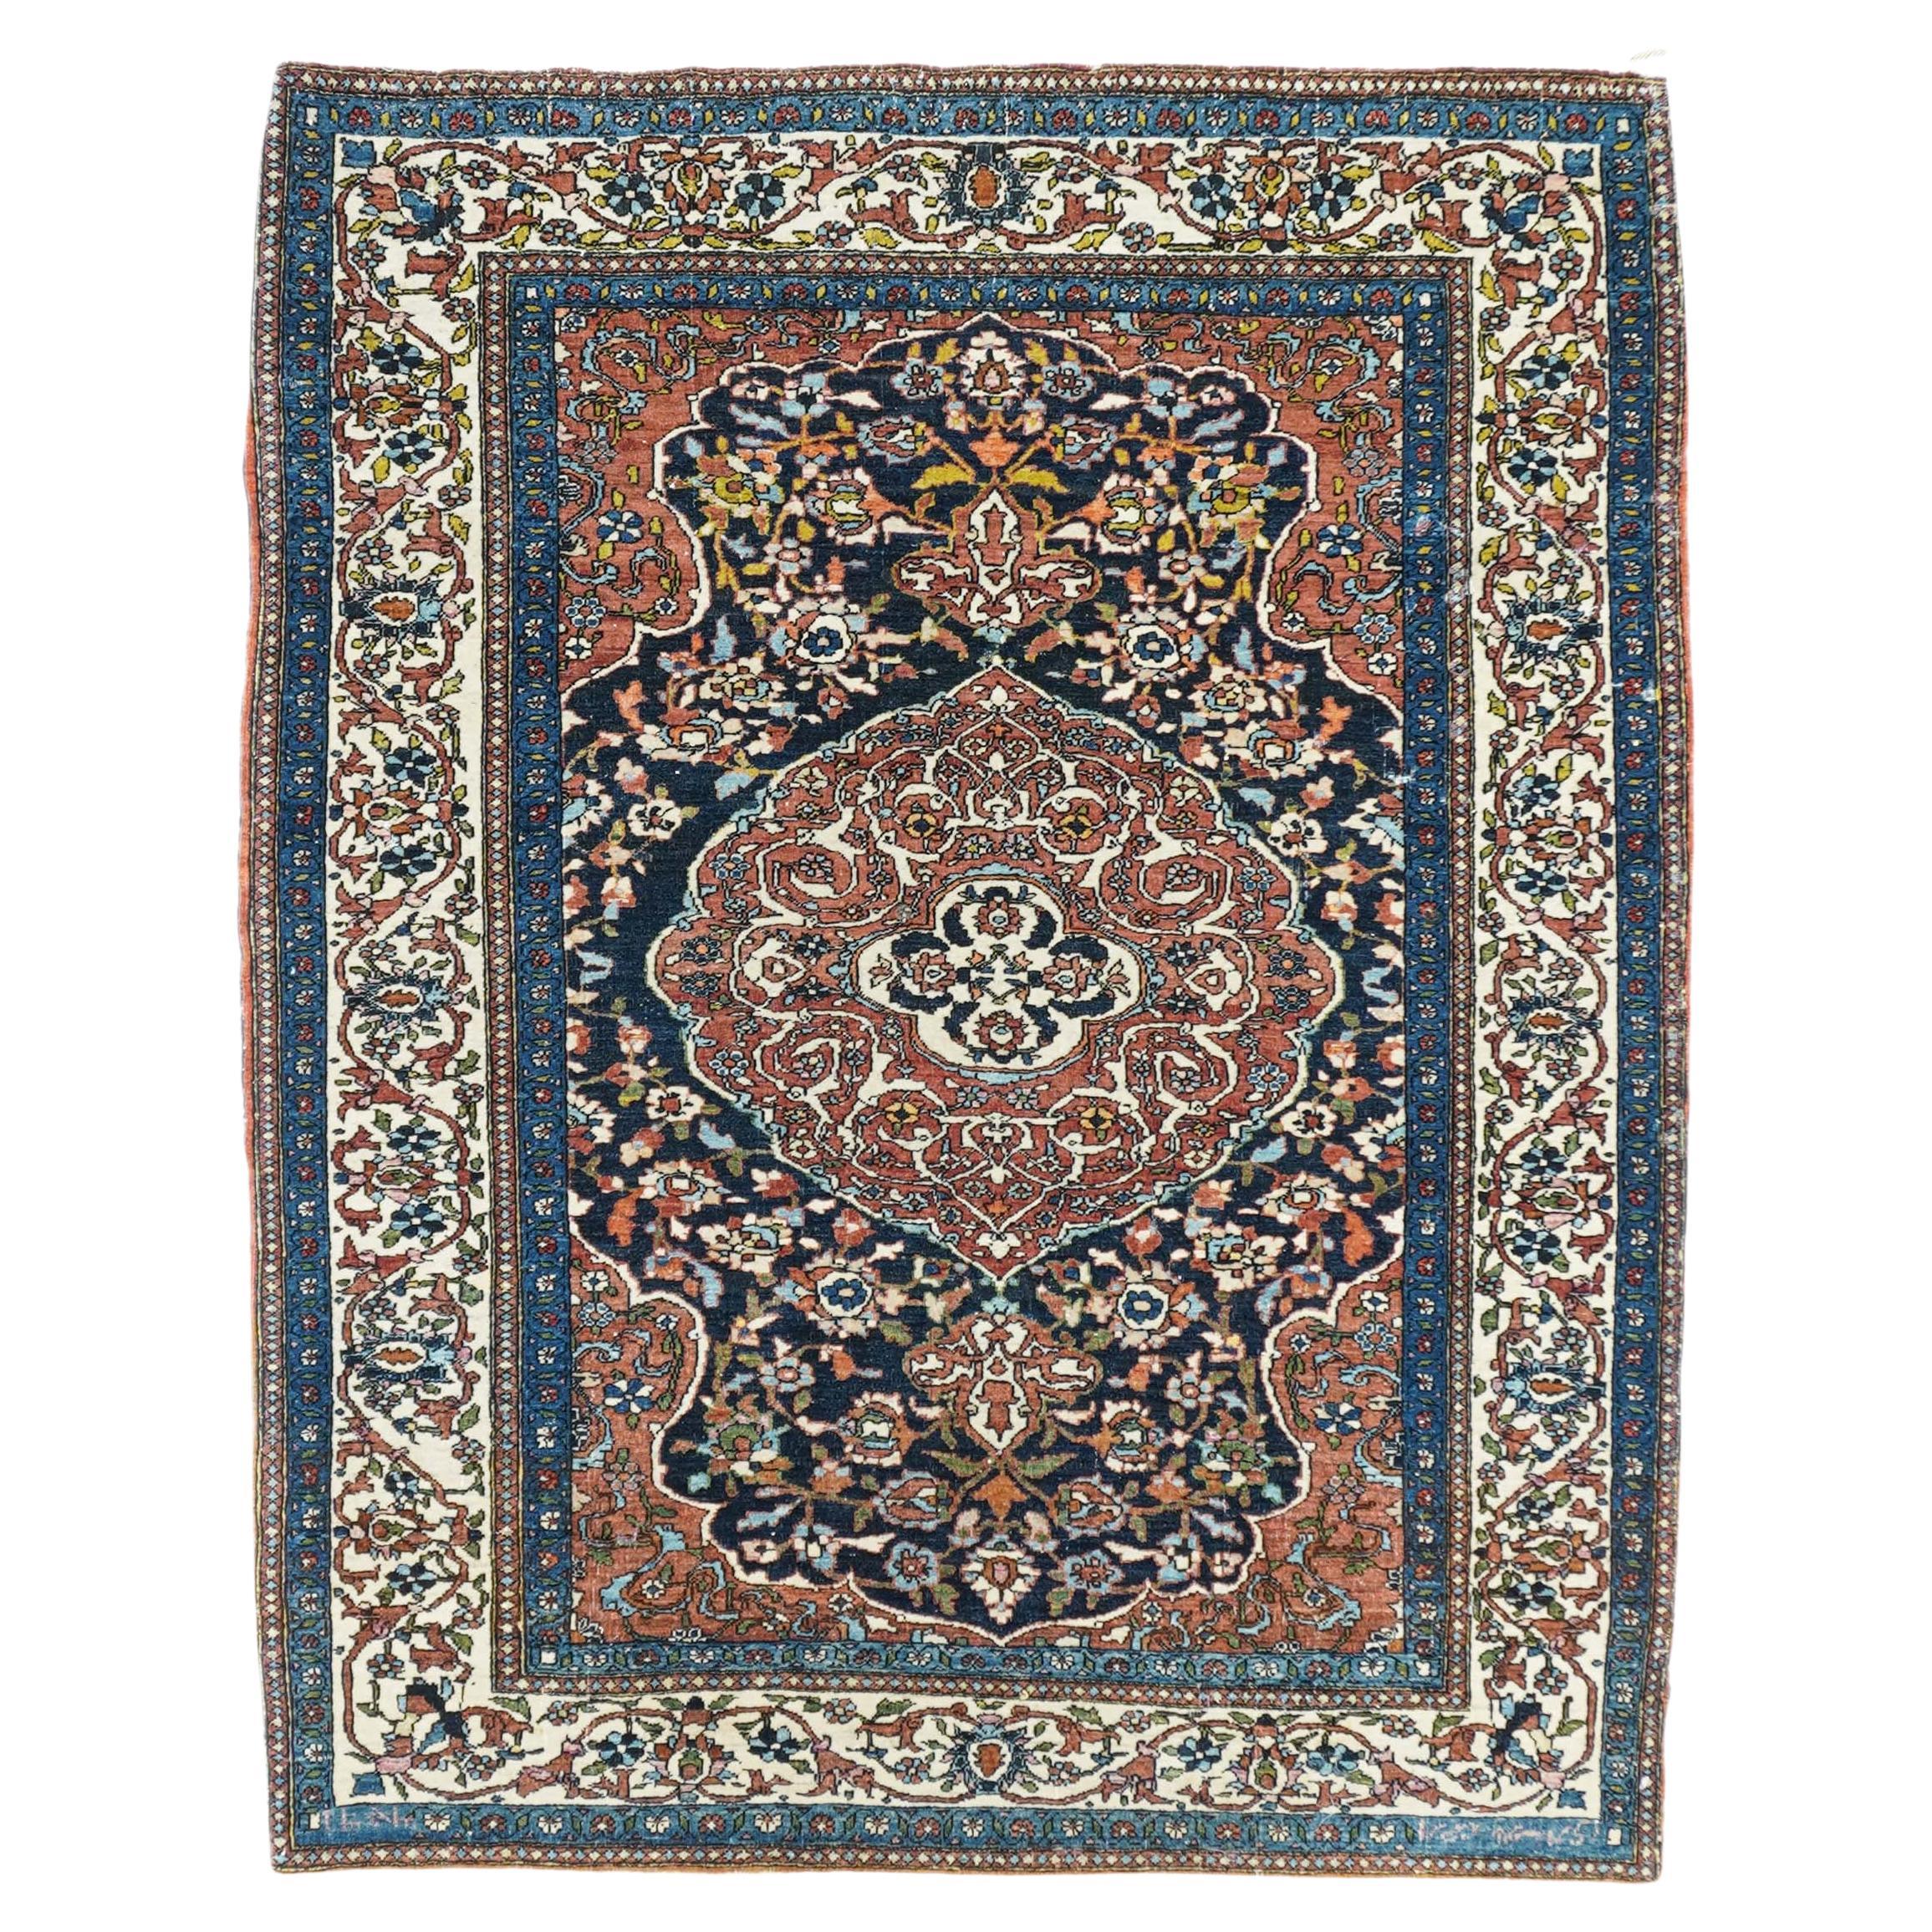 Antique Isfahan Rug